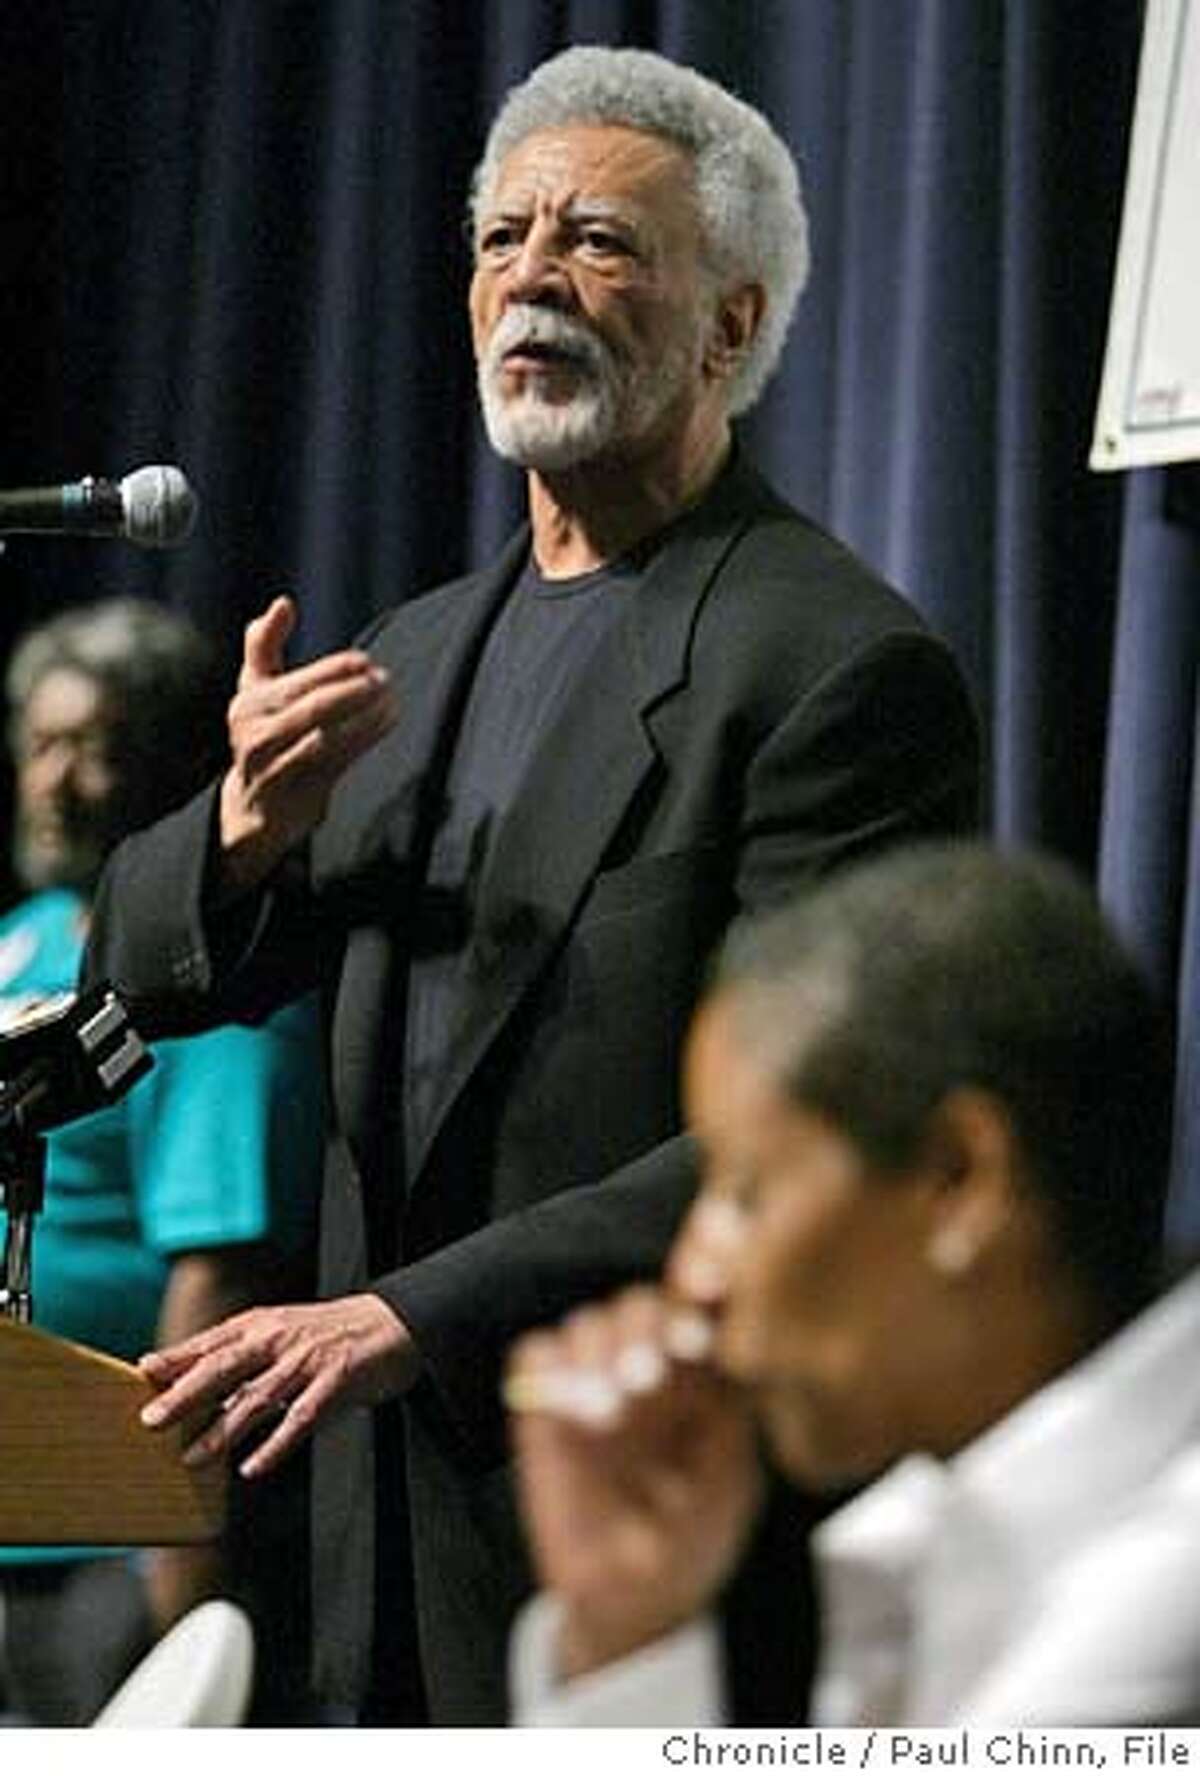 dellums08_081_pc.jpg Former East Bay congressman Ron Dellums, with his wife Cynthia Lewis Dellums (foreground), announced his candidacy for mayor of Oakland during an energetic gathering at Laney College on 10/7/05 in Oakland, Calif. PAUL CHINN/The Chronicle MANDATORY CREDIT FOR PHOTOG AND S.F. CHRONICLE/ - MAGS OUT